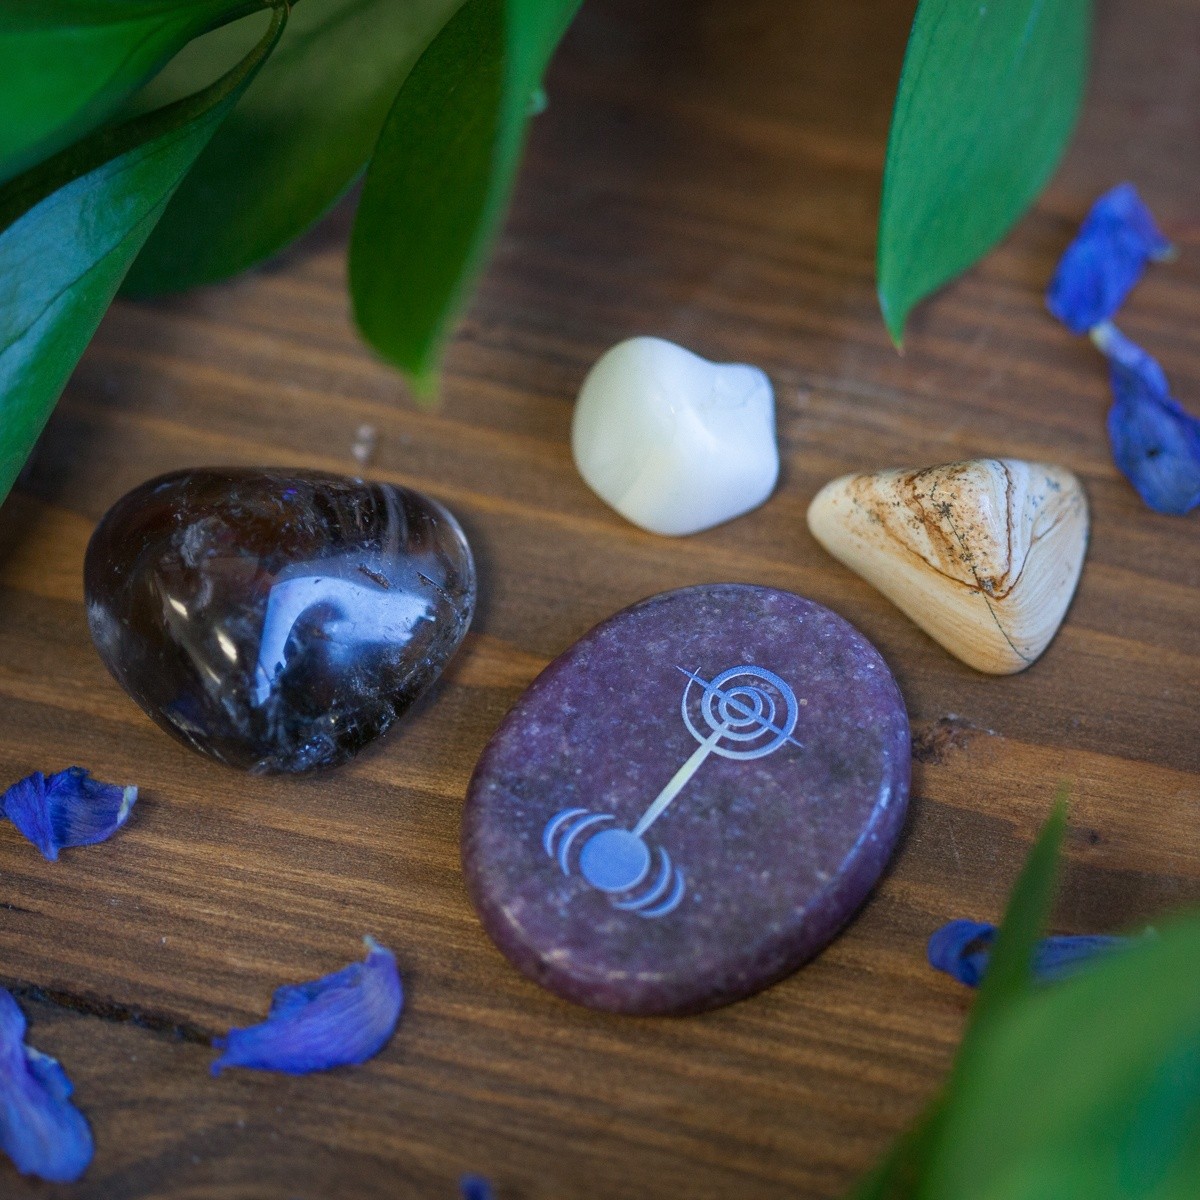 New Moon in Pisces incense ring coin offering holder Calcite Copper and Quartz Point Abalone shell specimen altar piece